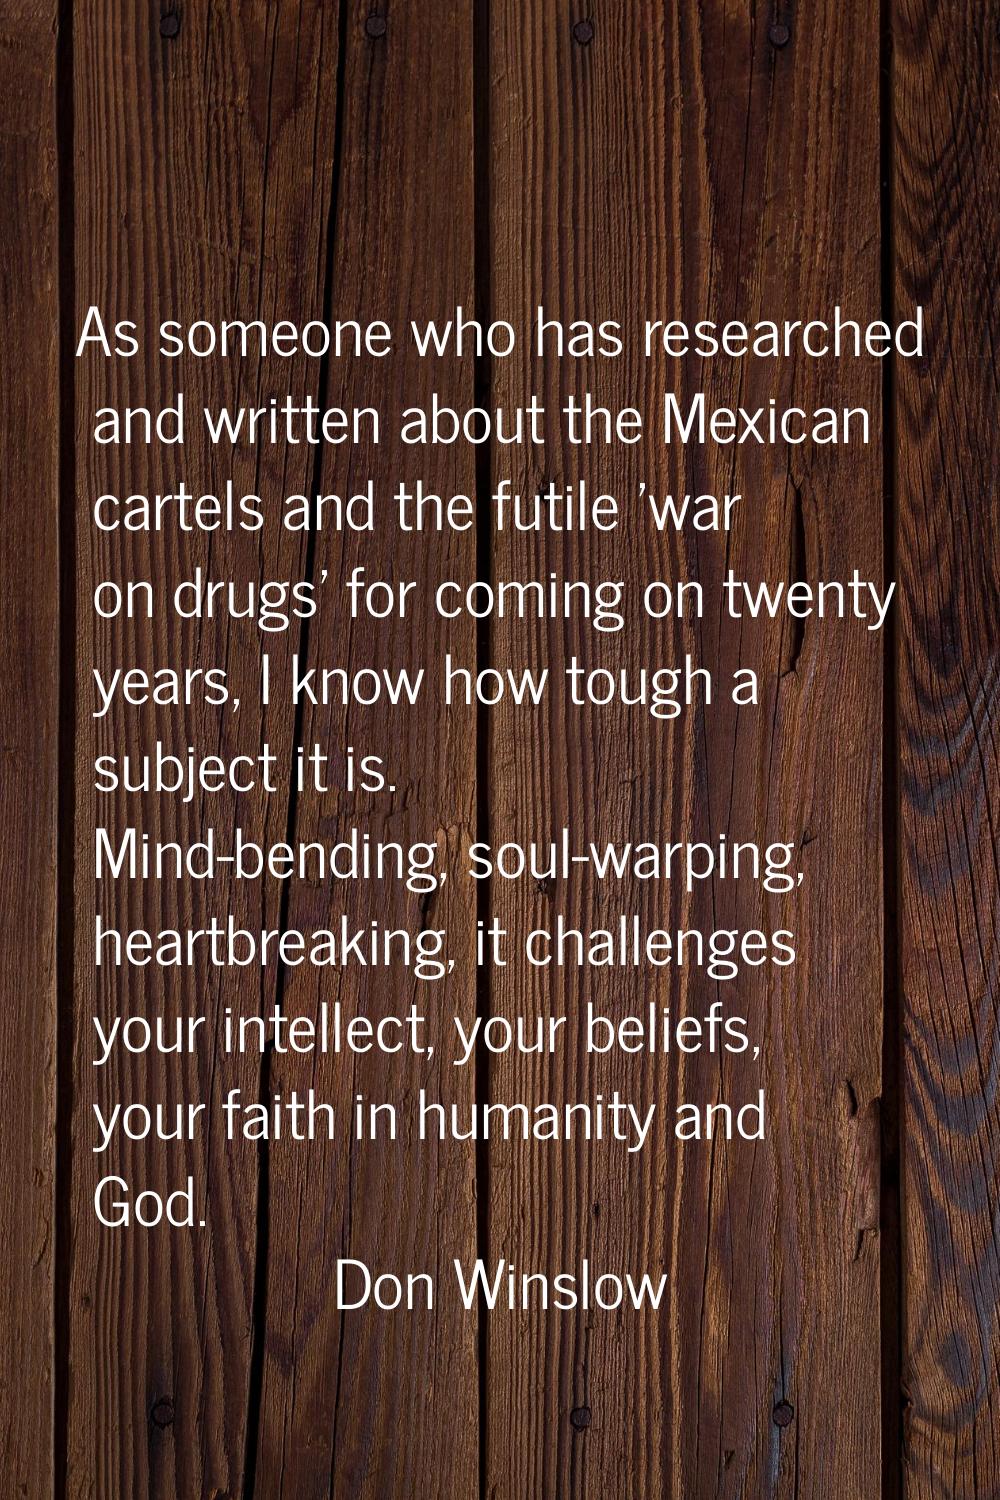 As someone who has researched and written about the Mexican cartels and the futile 'war on drugs' f